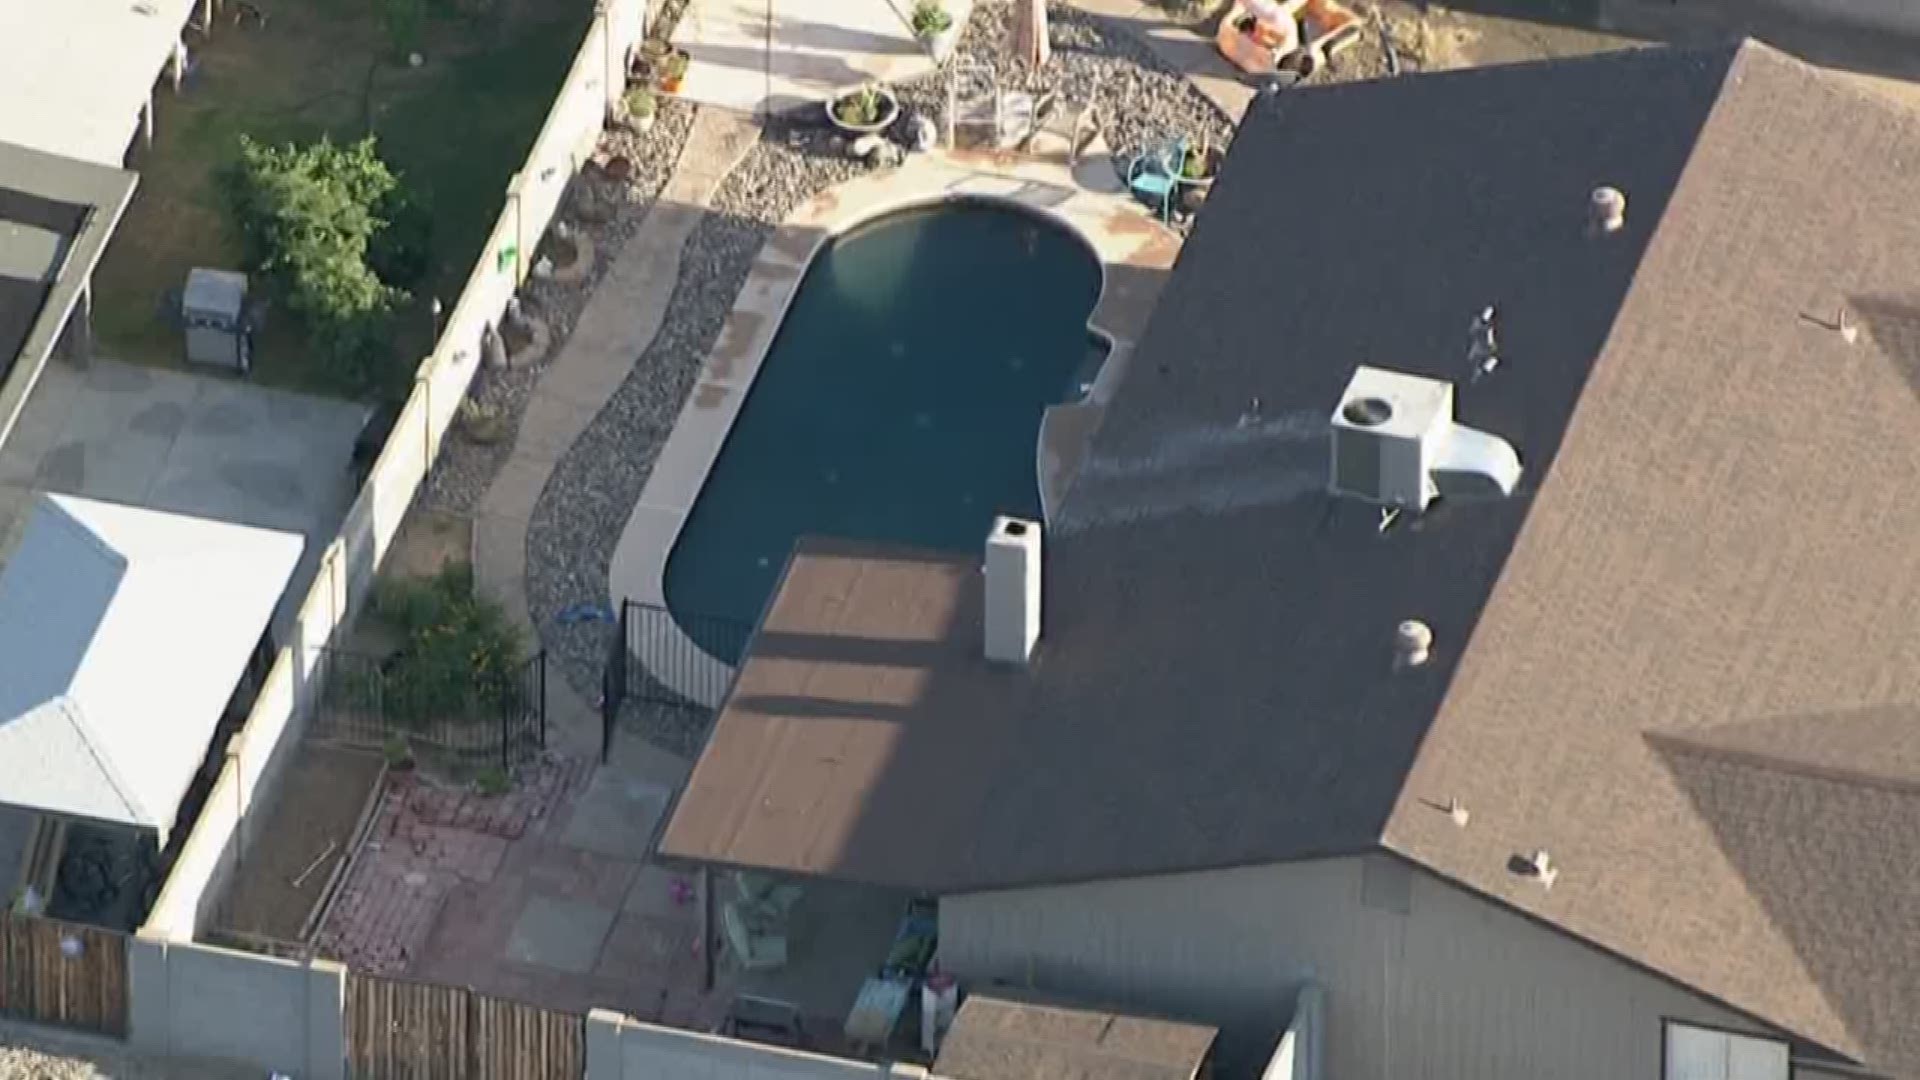 A two-year-old girl has been hospitalized after she was found in backyard pool near 6th Avenue and Camelback Road in Phoenix Tuesday evening.